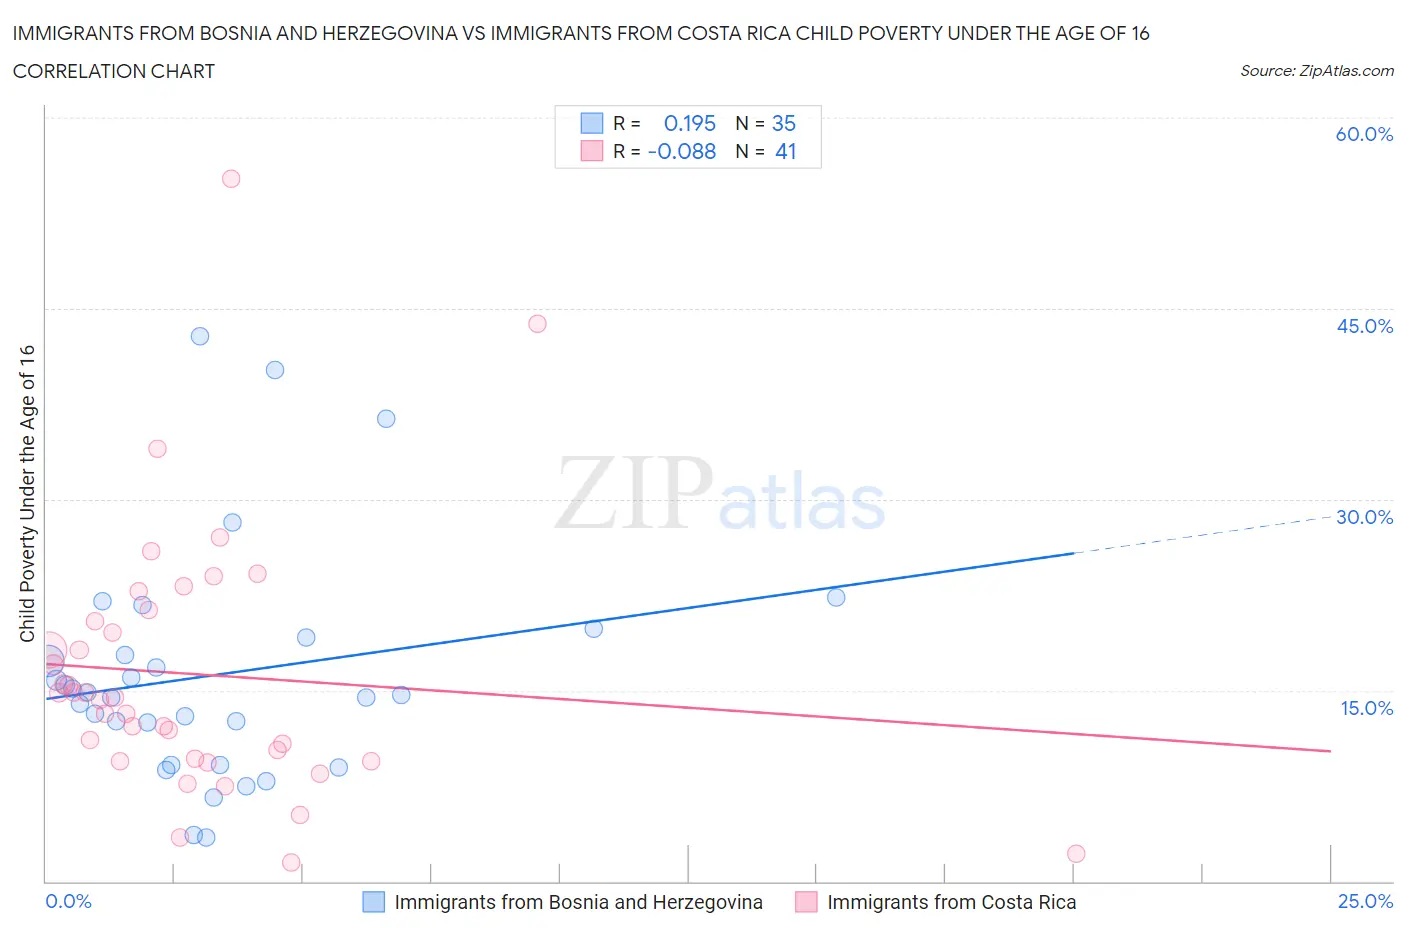 Immigrants from Bosnia and Herzegovina vs Immigrants from Costa Rica Child Poverty Under the Age of 16